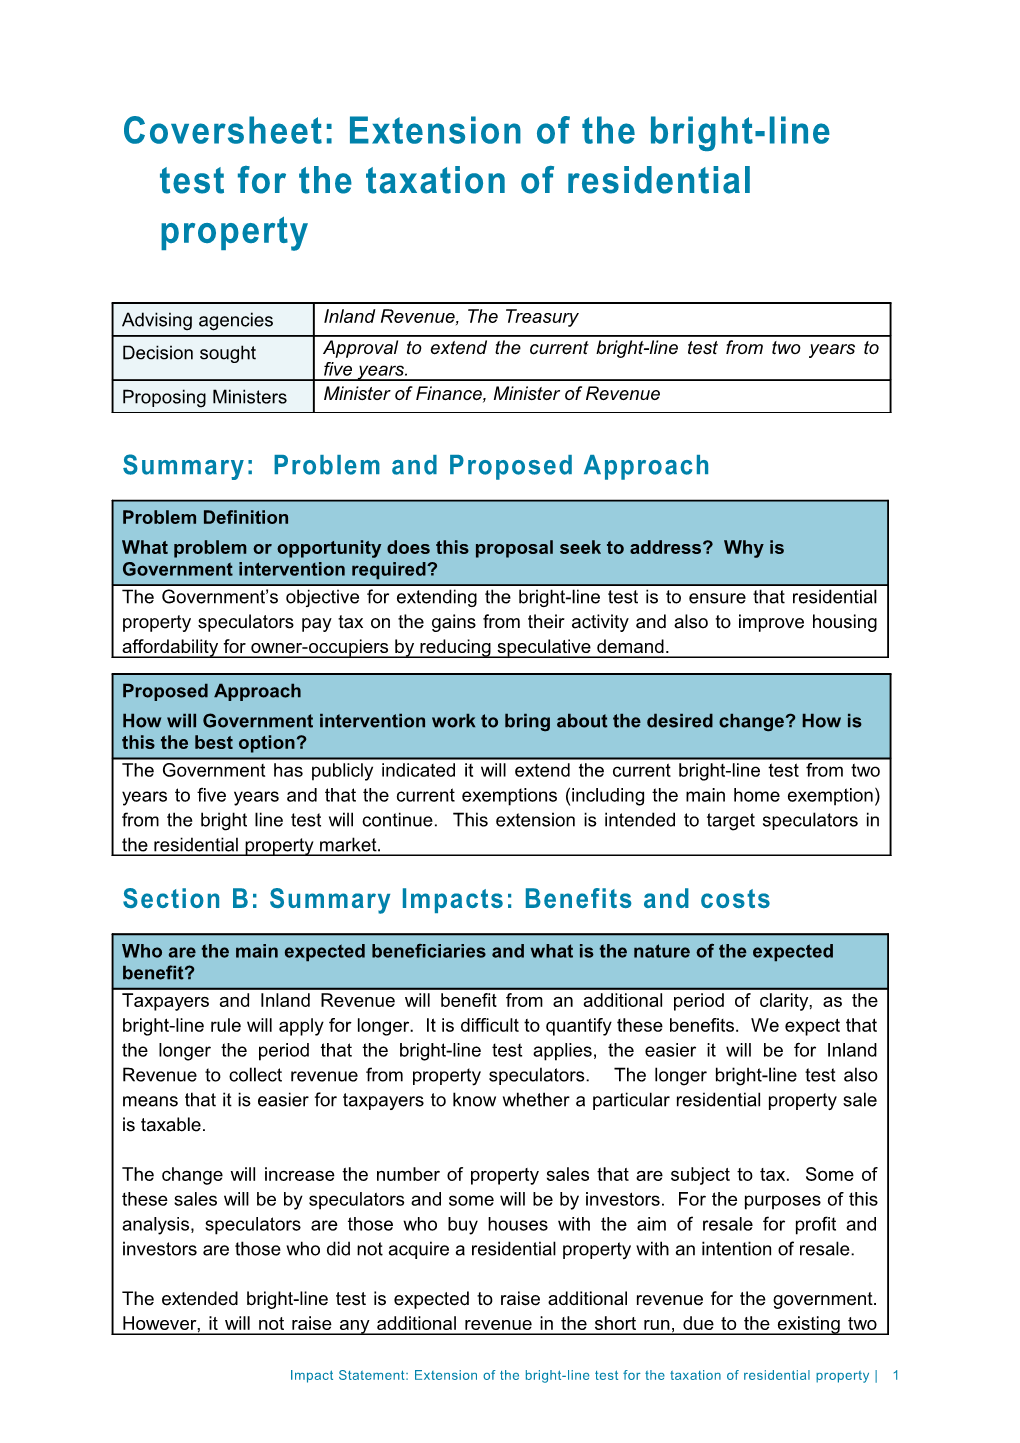 Regulatory Impact Assessment - Extension of the Bright-Line Test for the Taxation of Residential